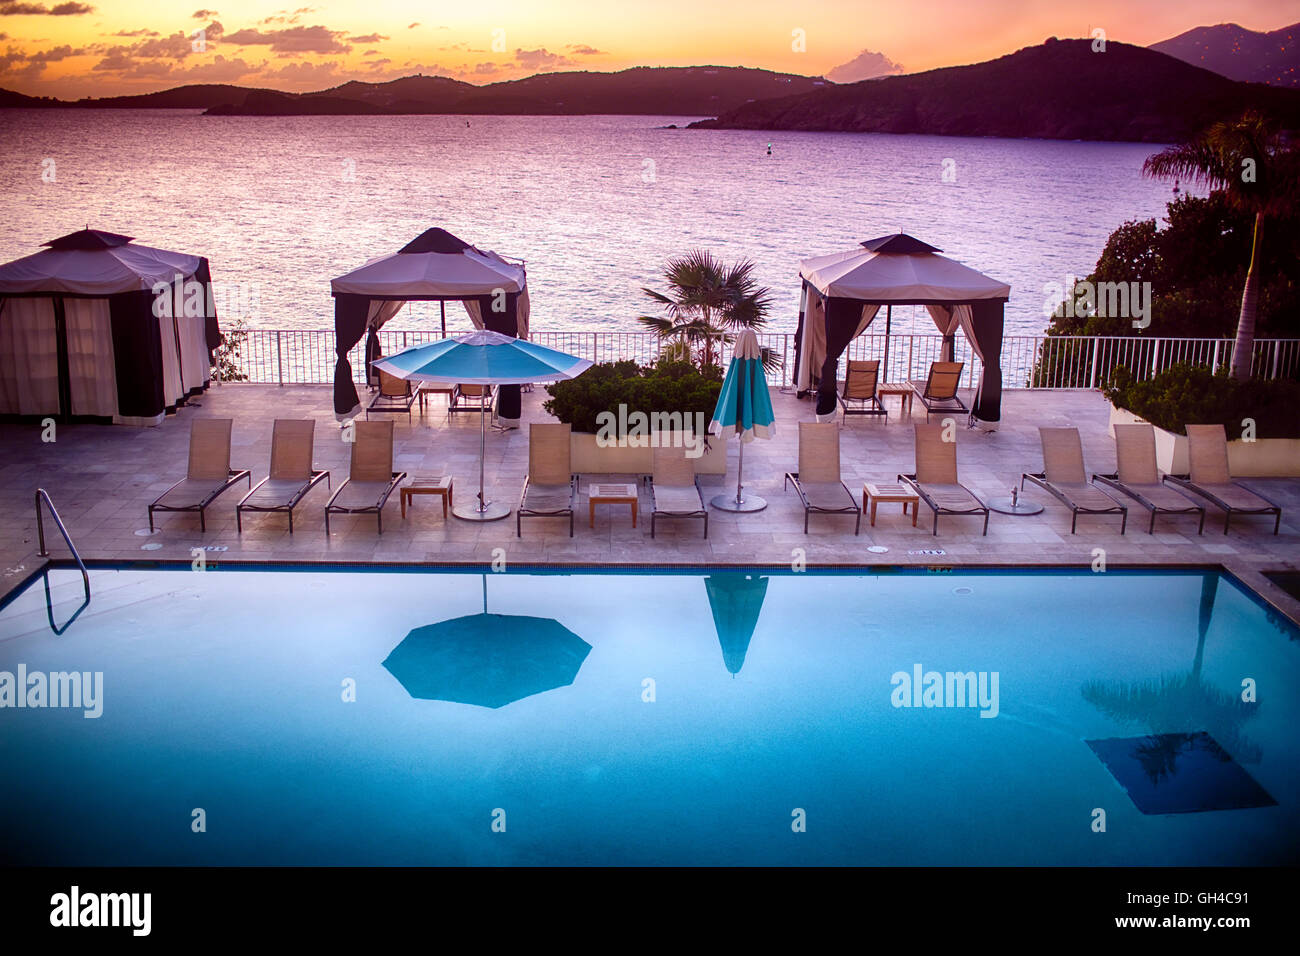 High Angle View of a Pool with Lounge Chairs and Parasols, Overlooking a Bay at Sunset, Charlotte Amalie, St Thomas, US Virgin I Stock Photo